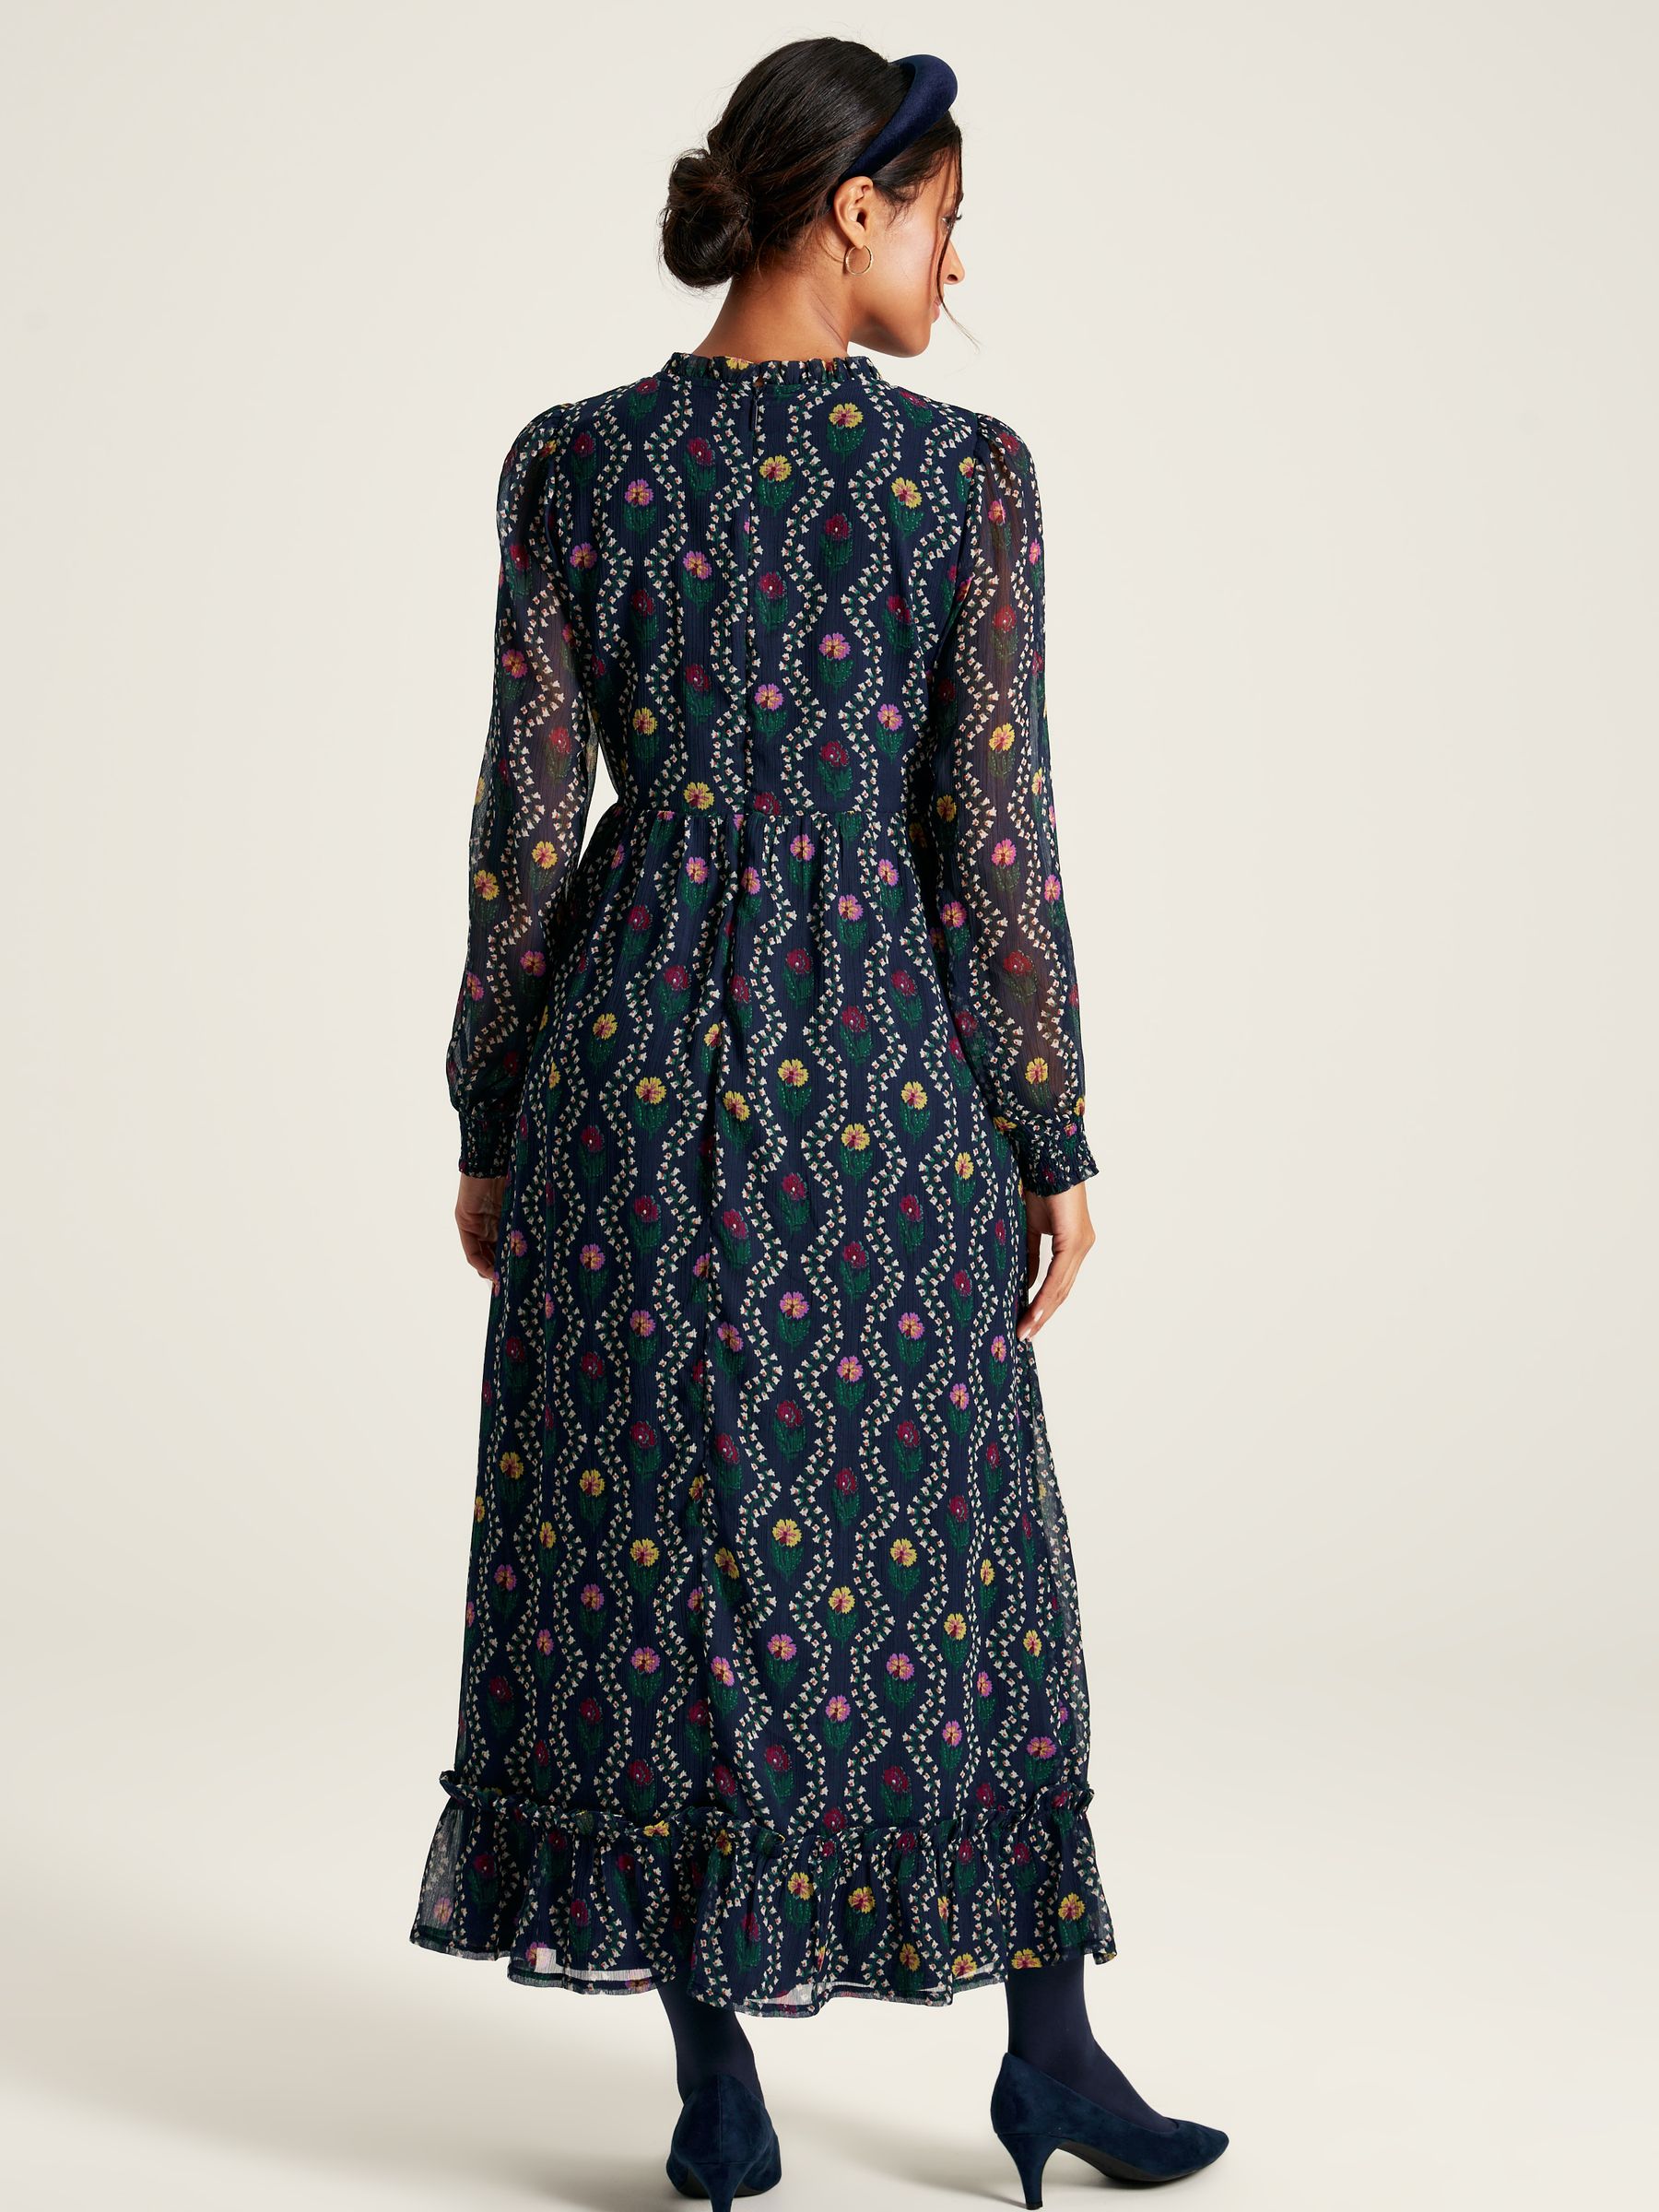 Buy Joules Helena Printed Dress from the Joules online shop